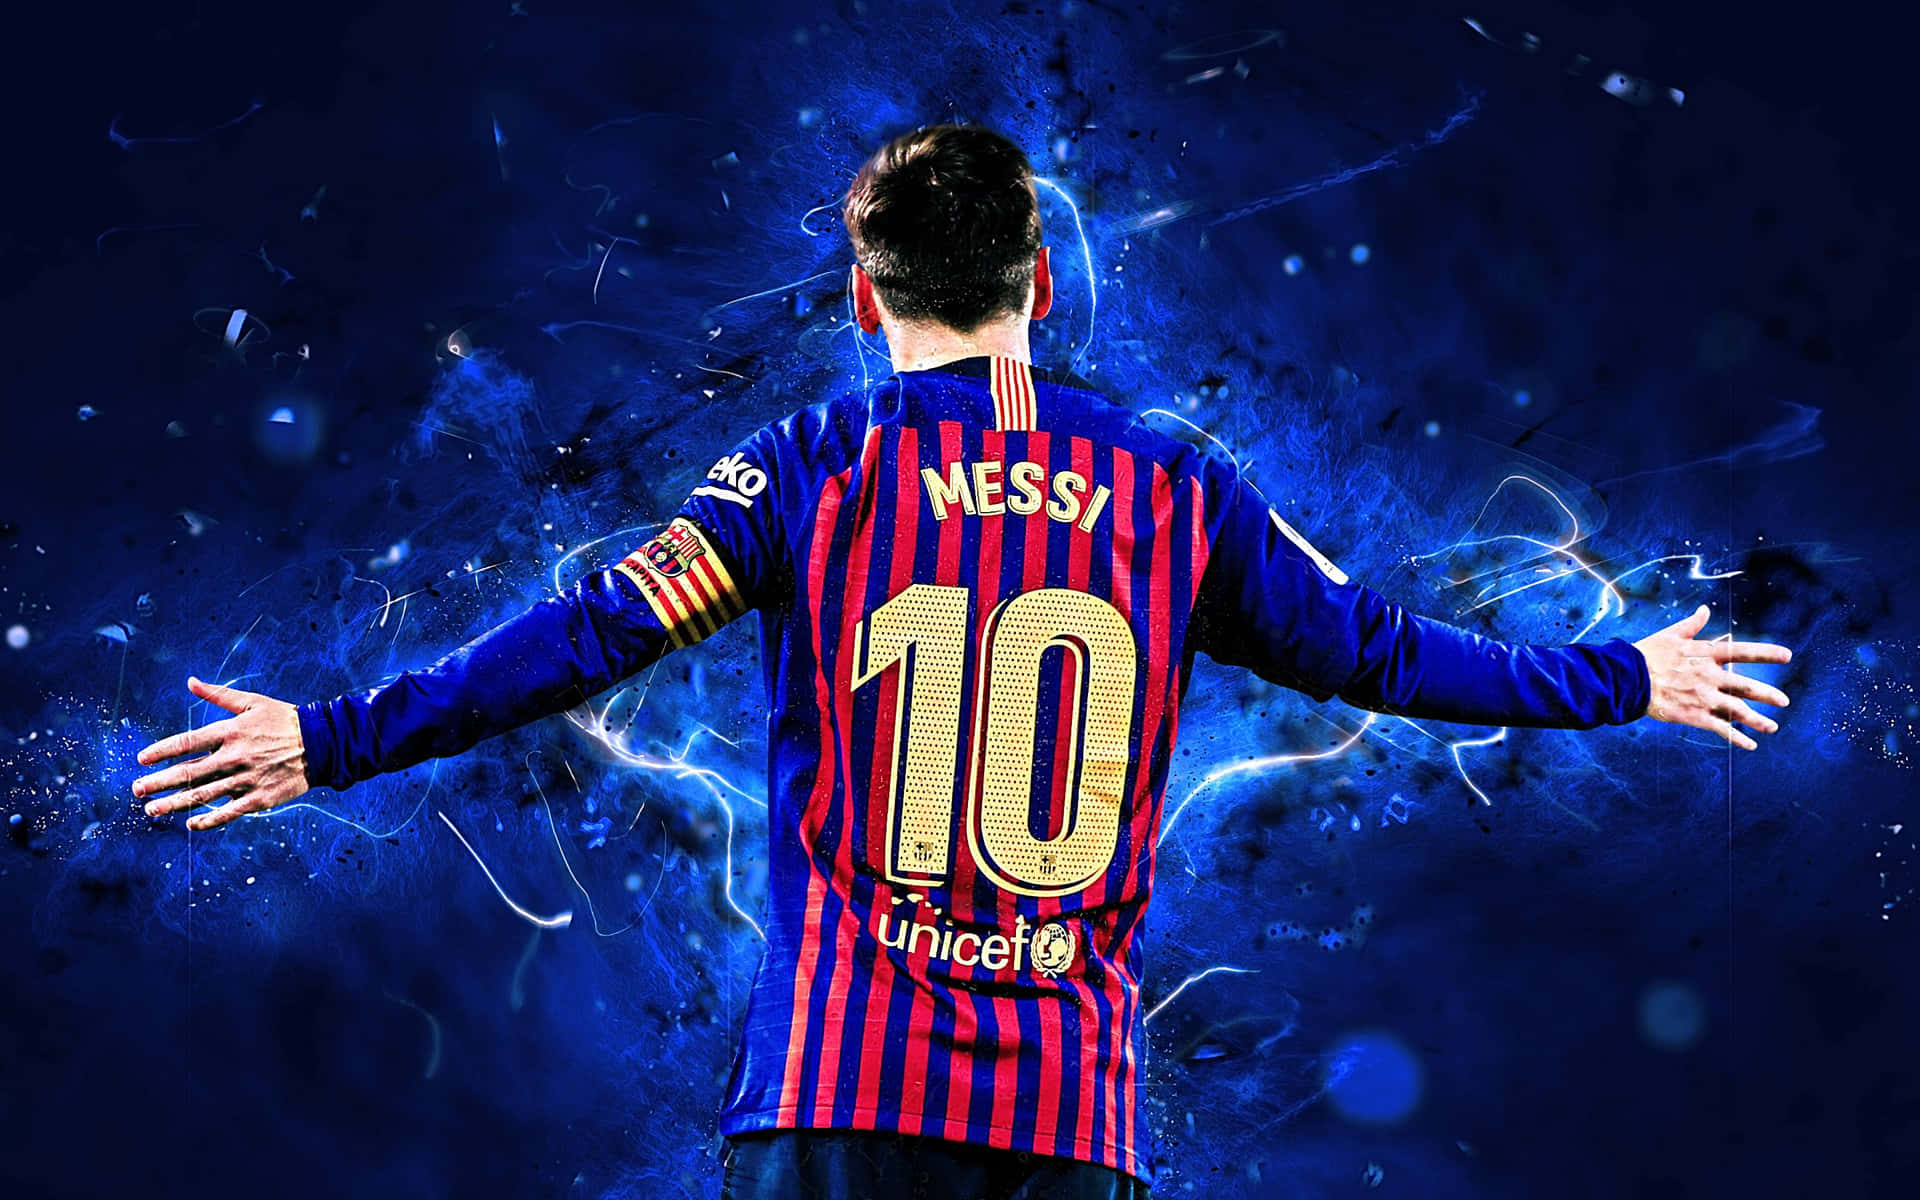 Lionel Messi dribbles around his defender surrounded by a colorful sunset.